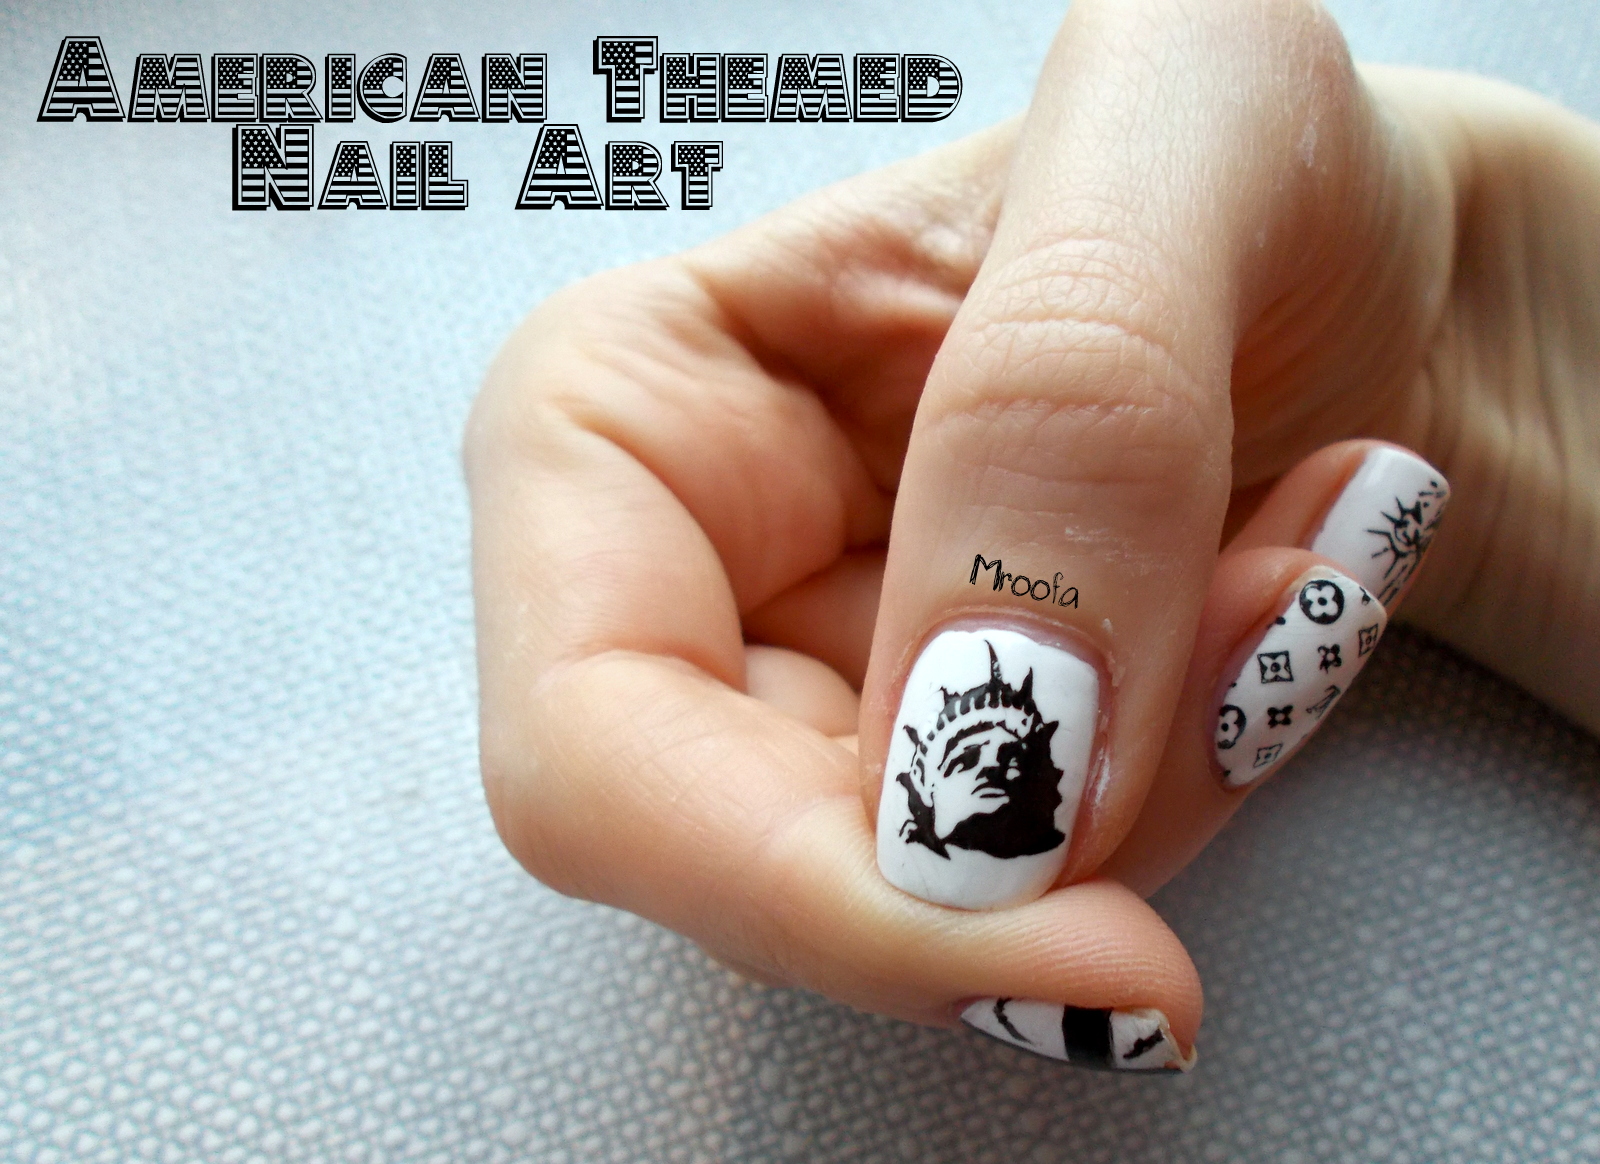 6. American Themed Nail Art Design - wide 11